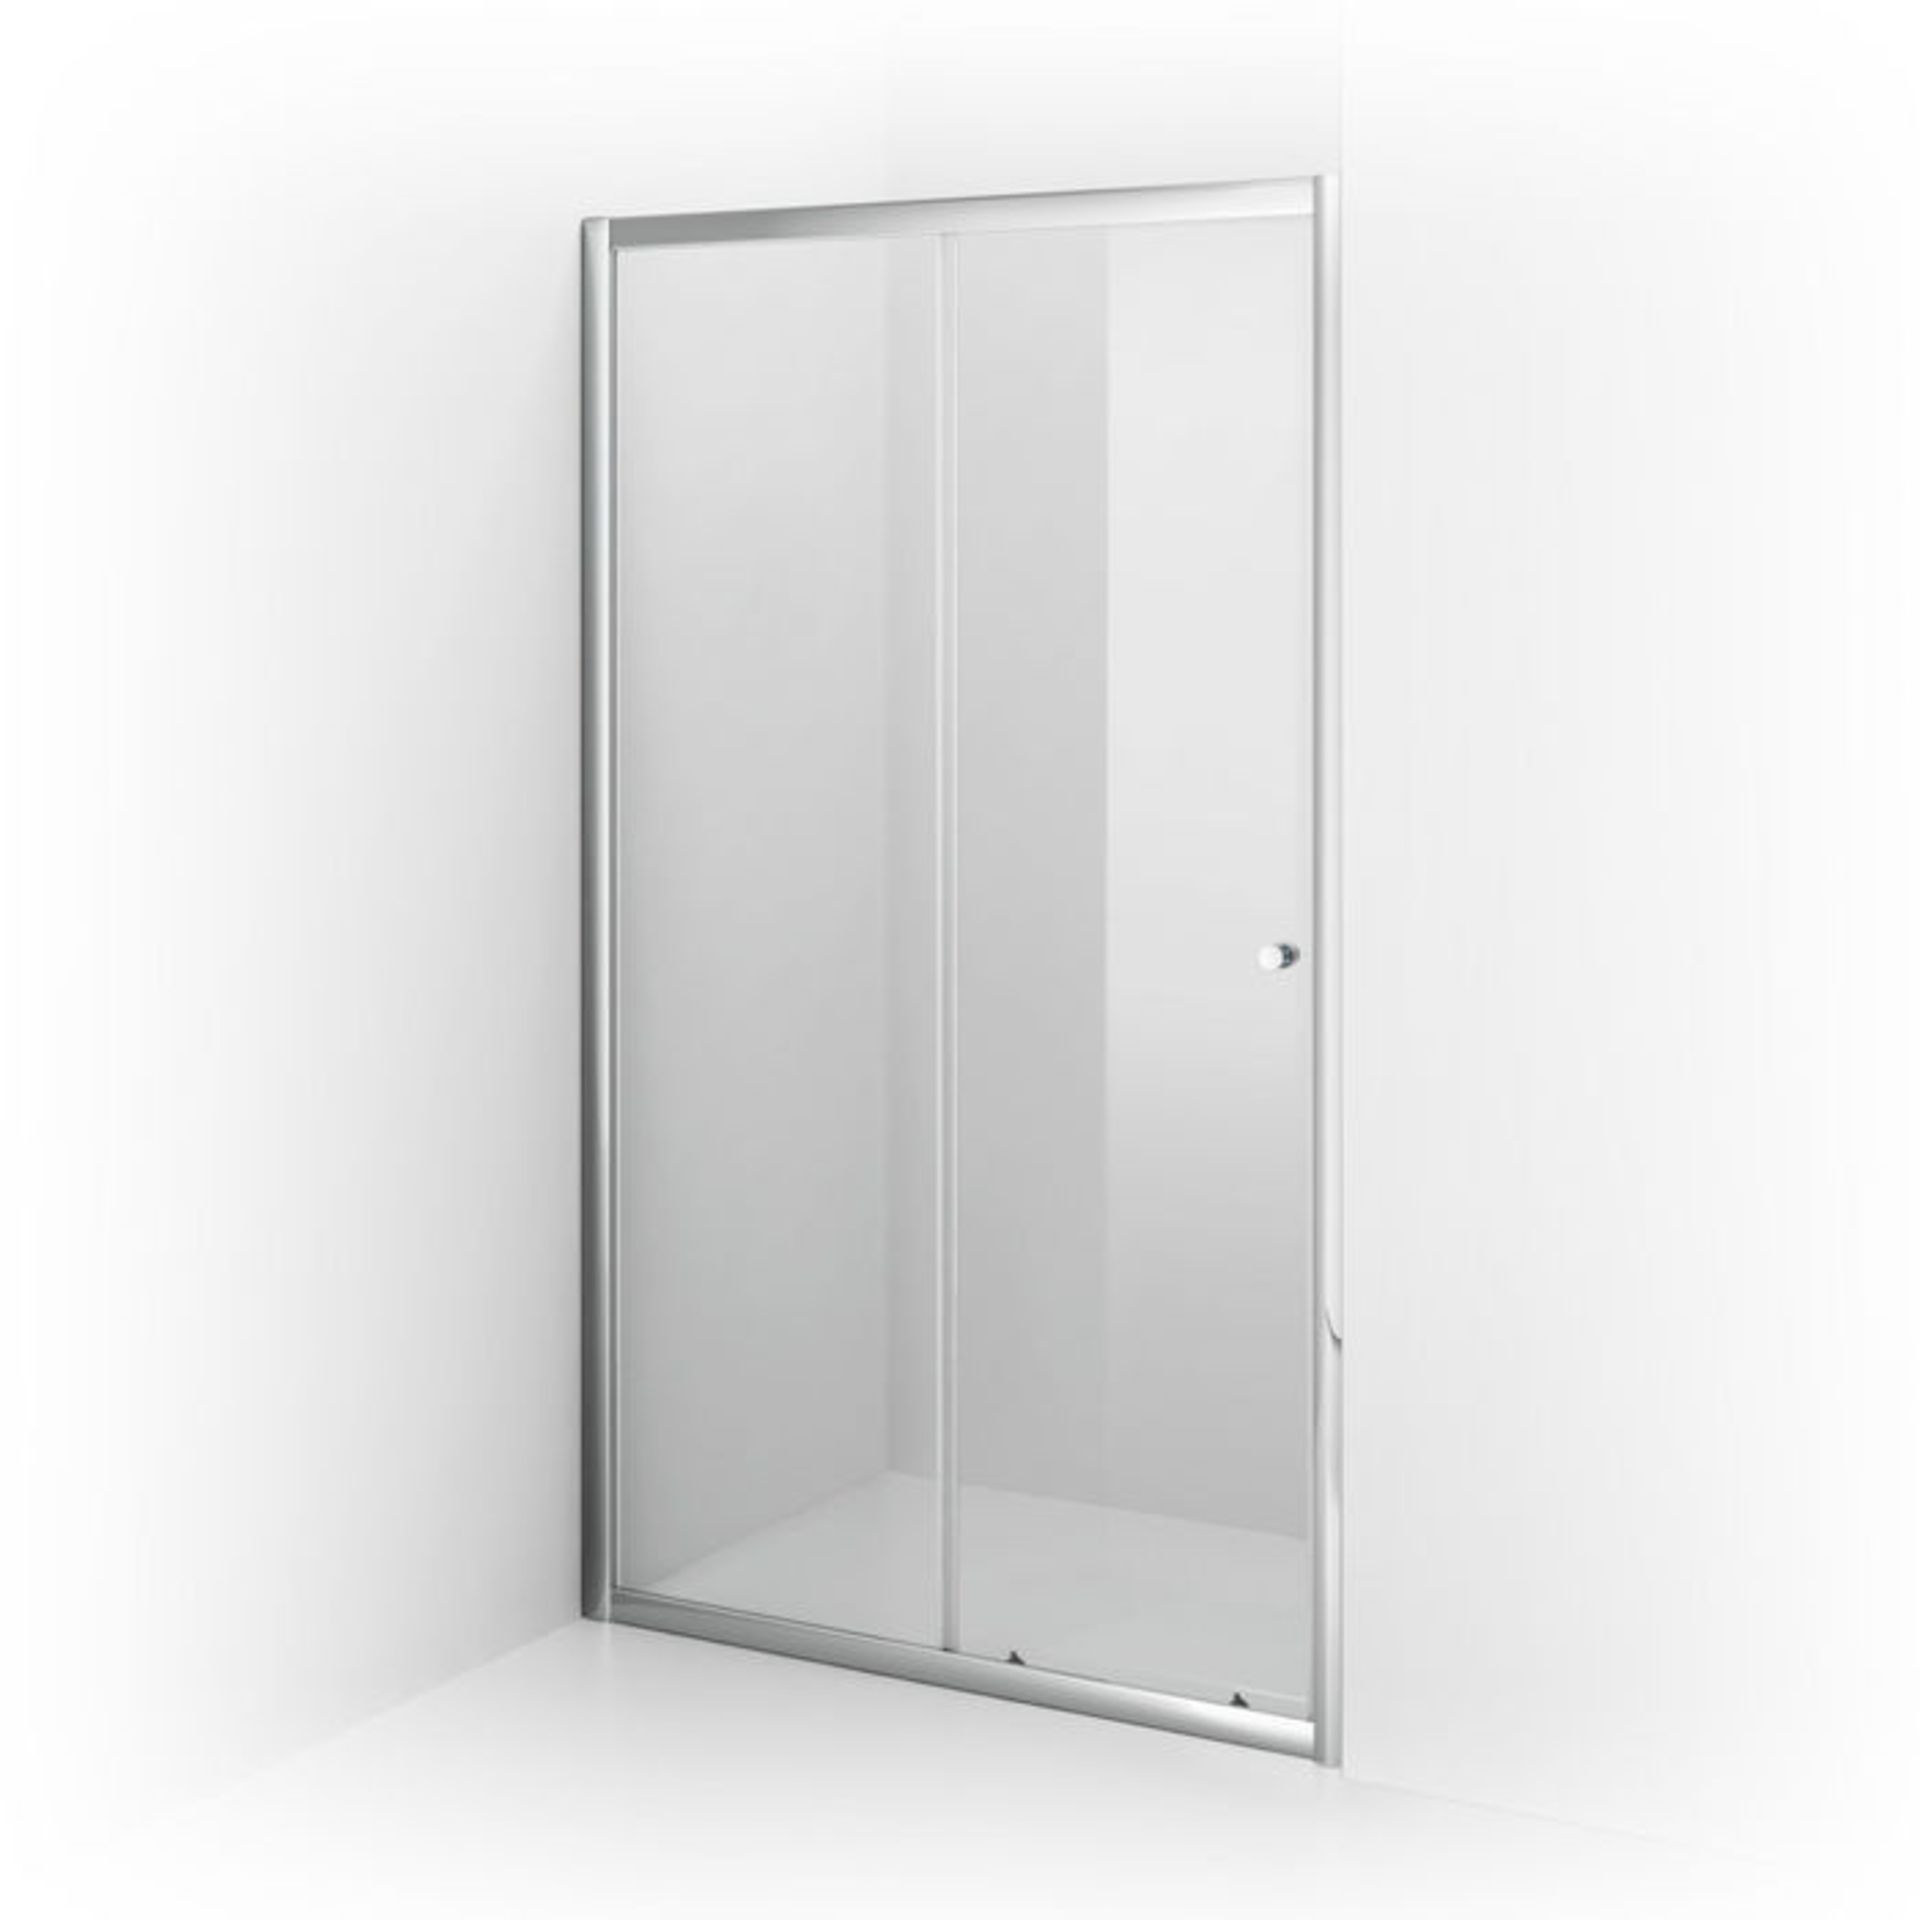 (DK155) 1000mm - Elements Sliding Shower Door. RRP £299.99. 4mm Safety Glass Fully waterproof tested - Image 4 of 4